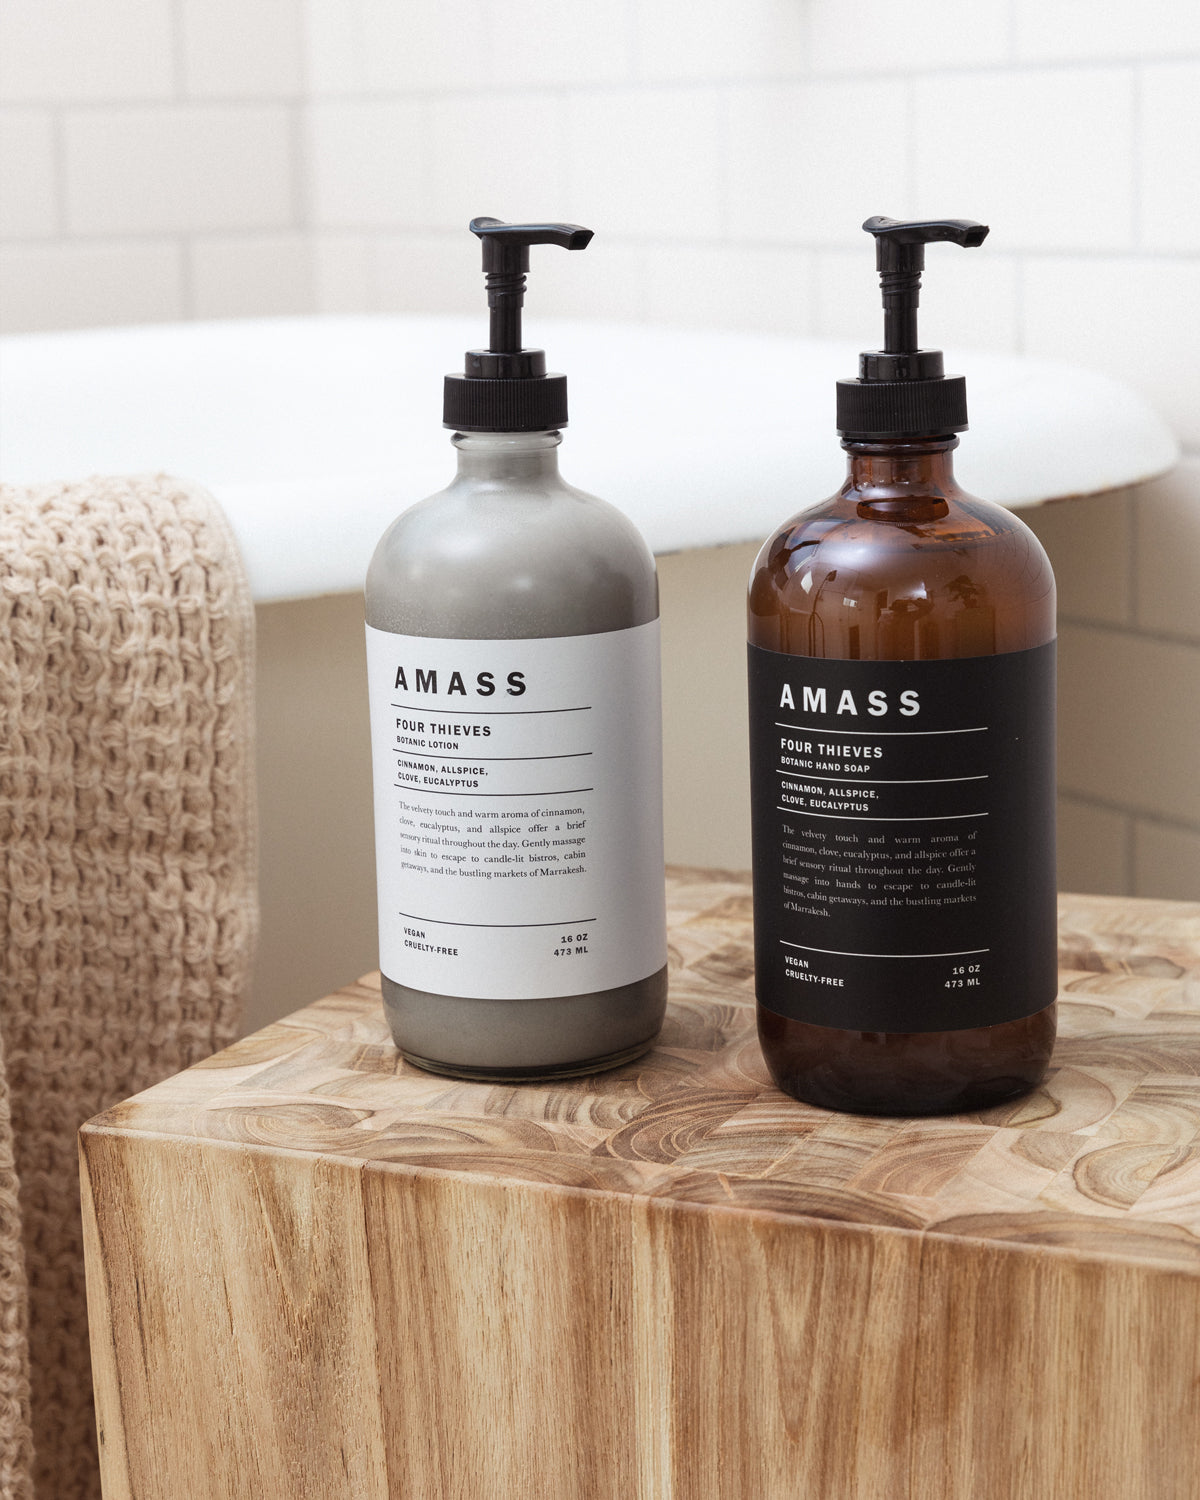 Amass Hand Soap Products